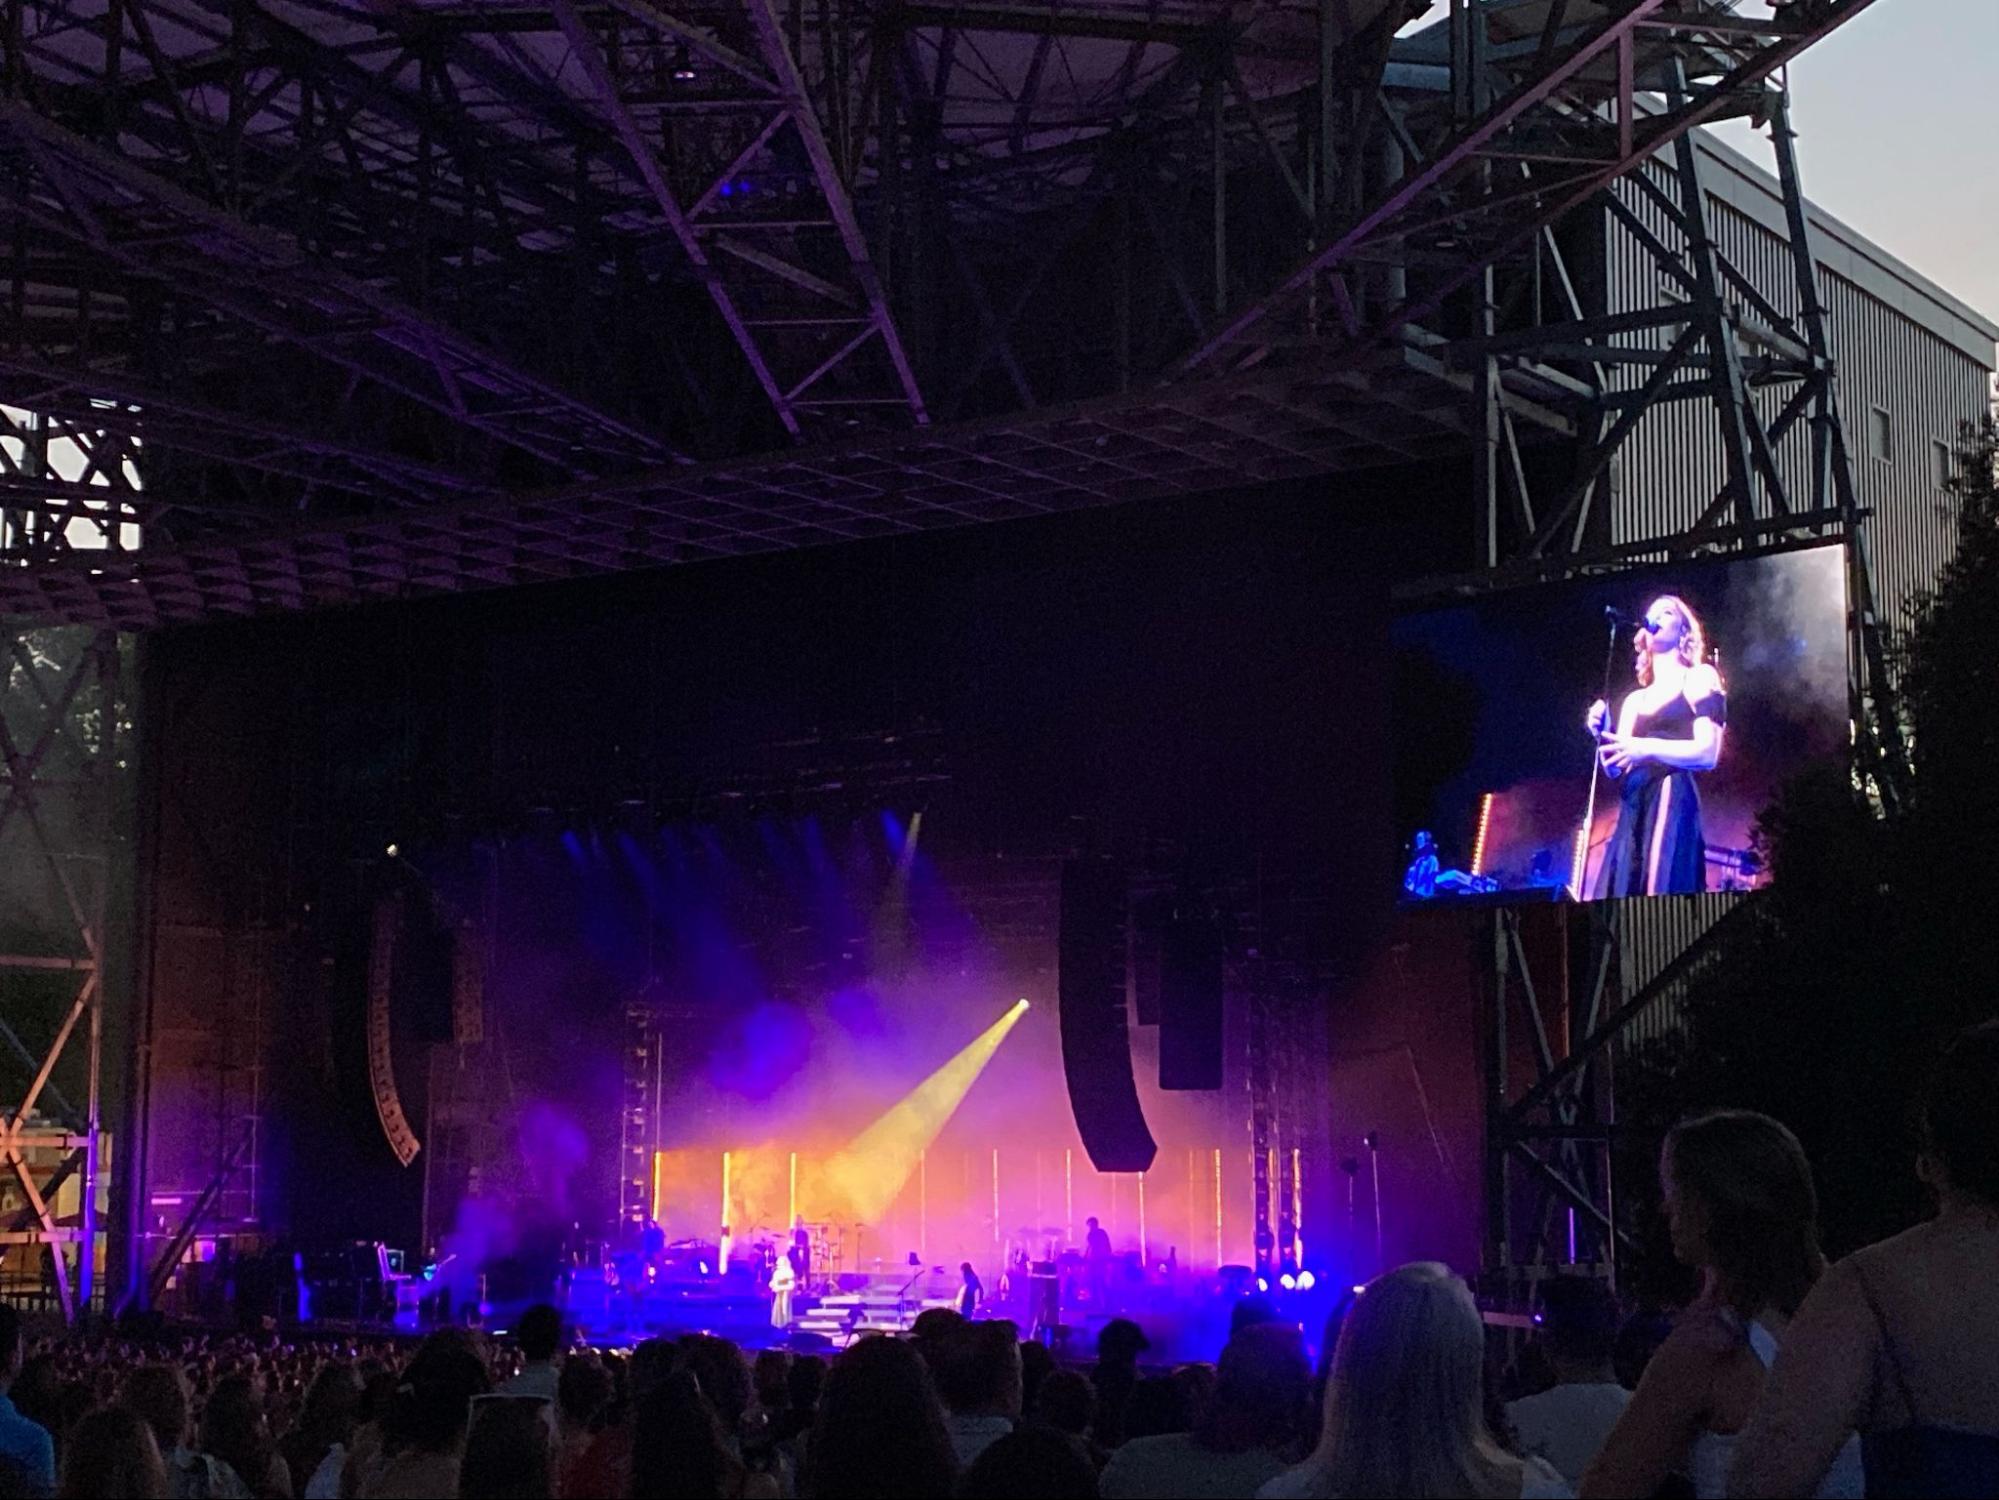 Alpharetta welcomes Maggie Rogers on the “Don’t Forget Me” tour